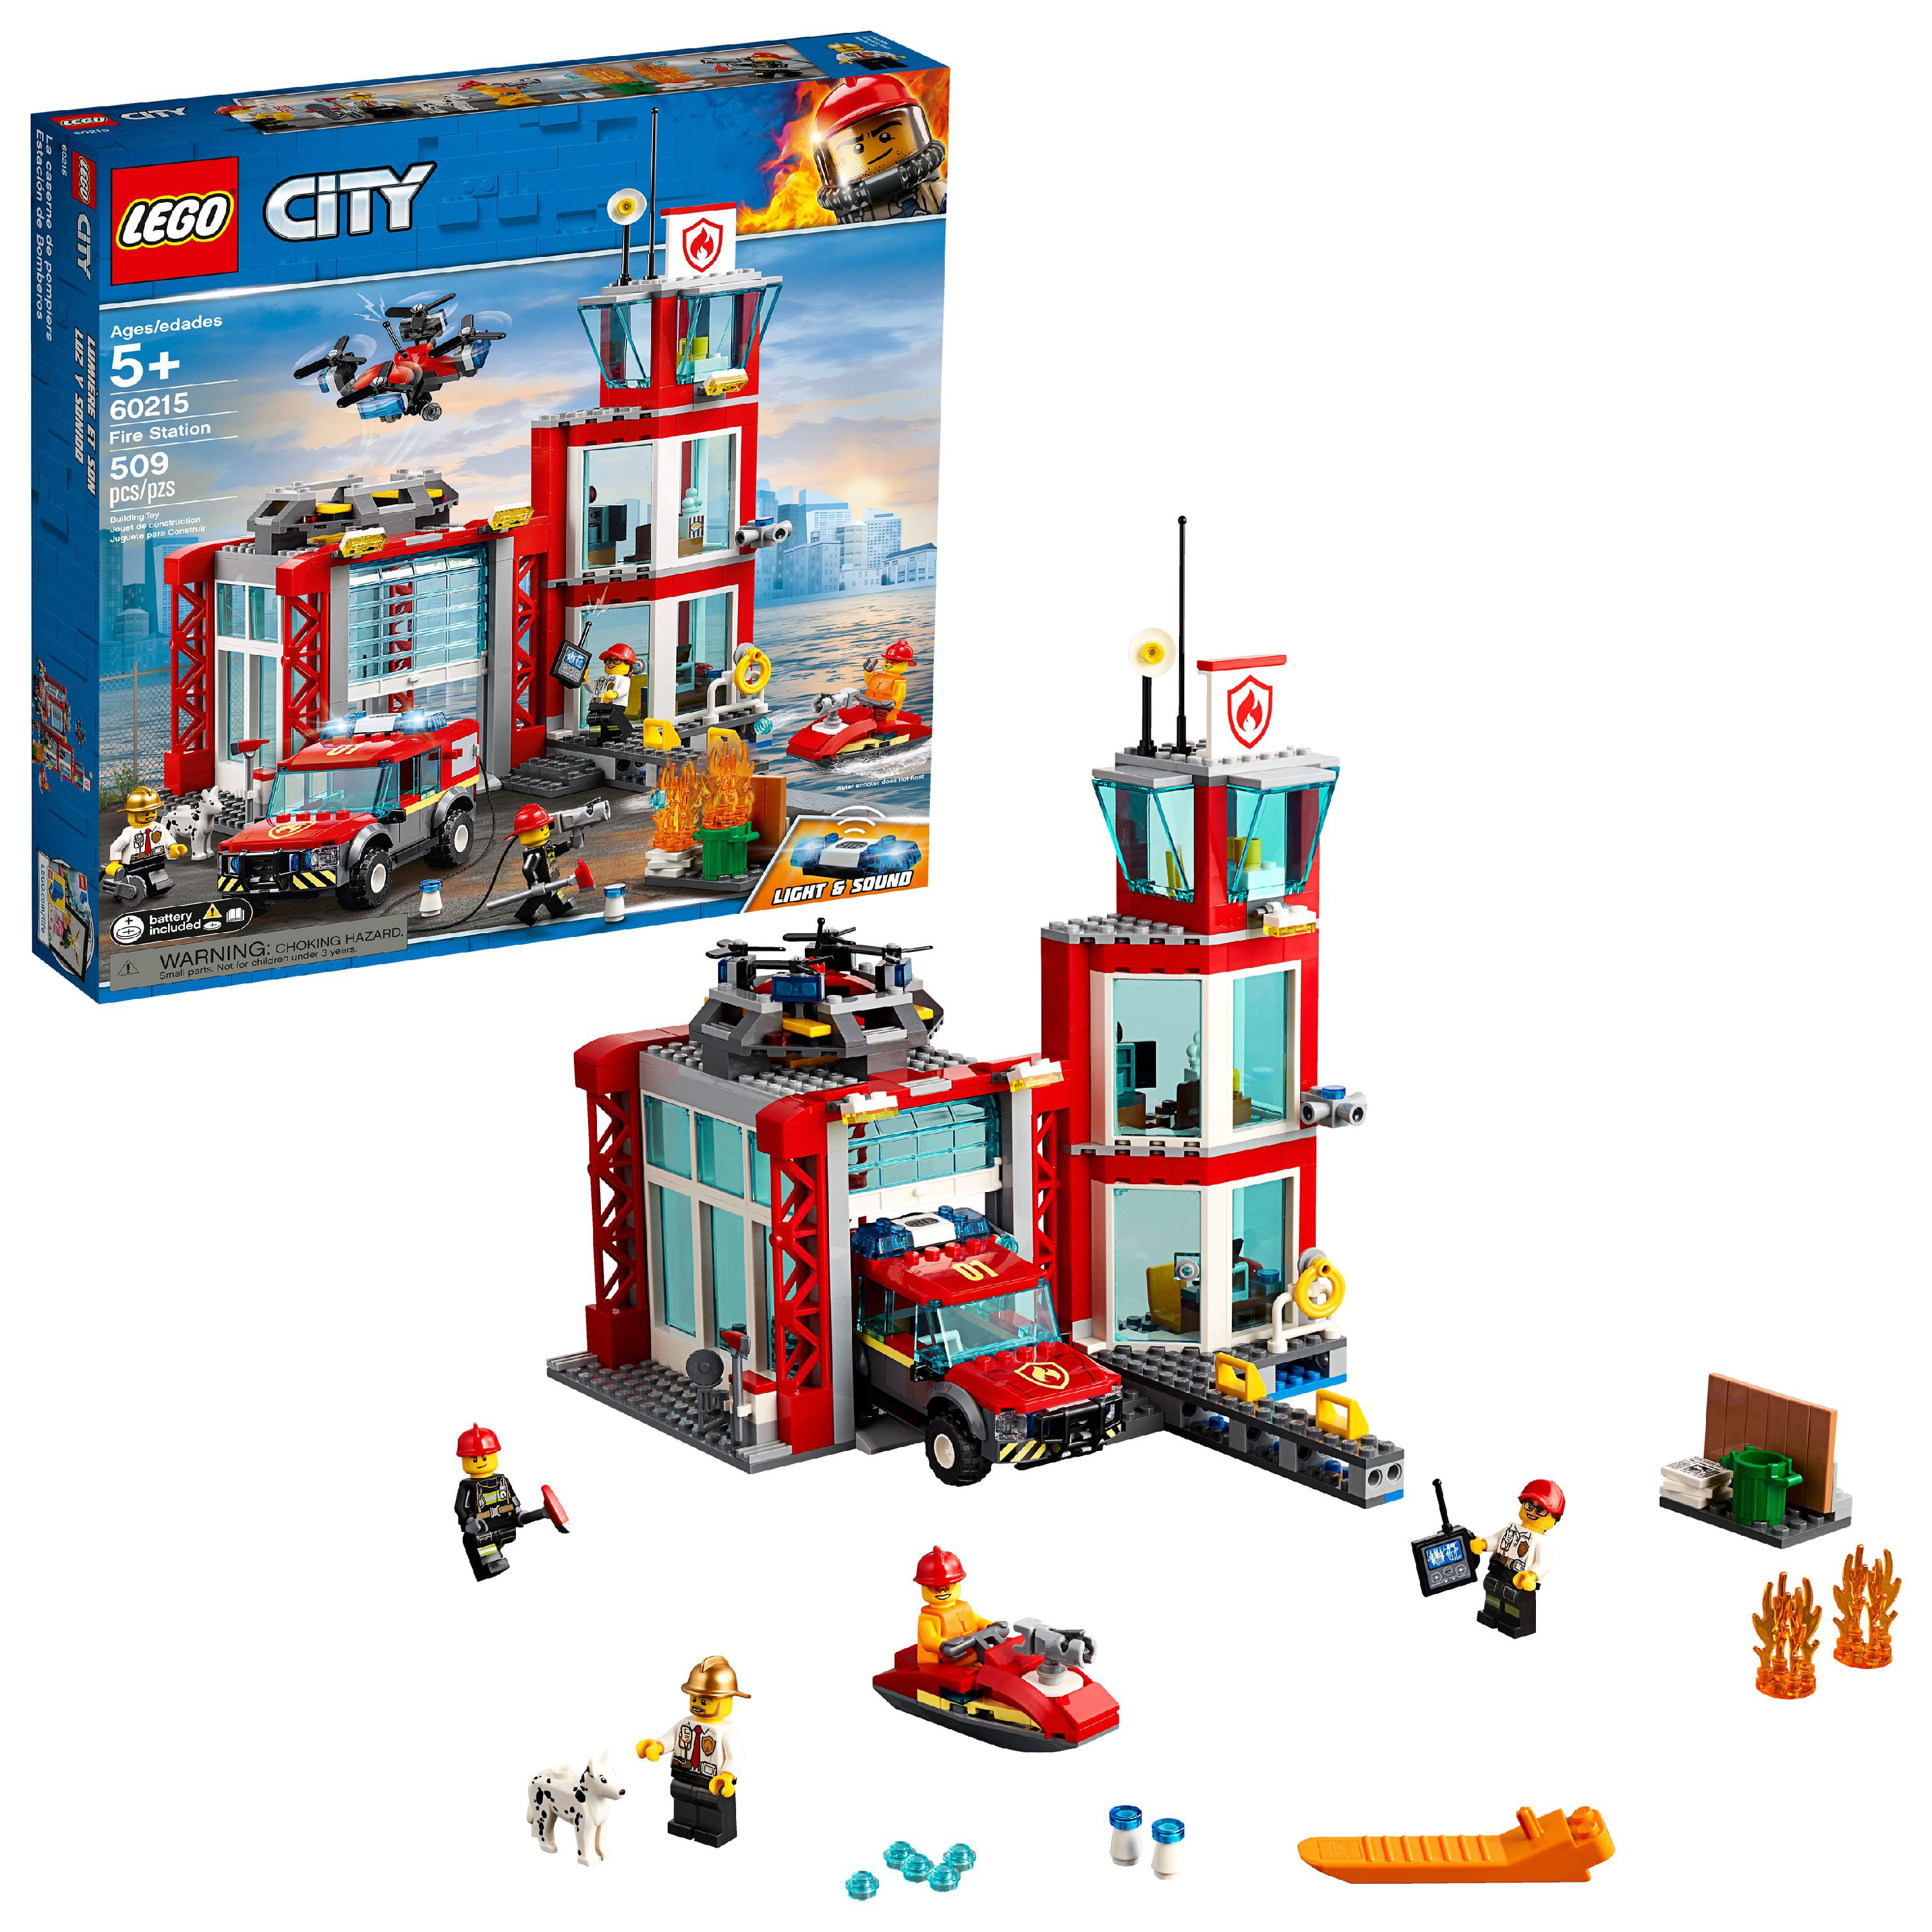 LEGO City Fire Command Unit 60282 Building Kit; Fun Firefighter Toy Building Set for Kids 380 Pieces New 2021